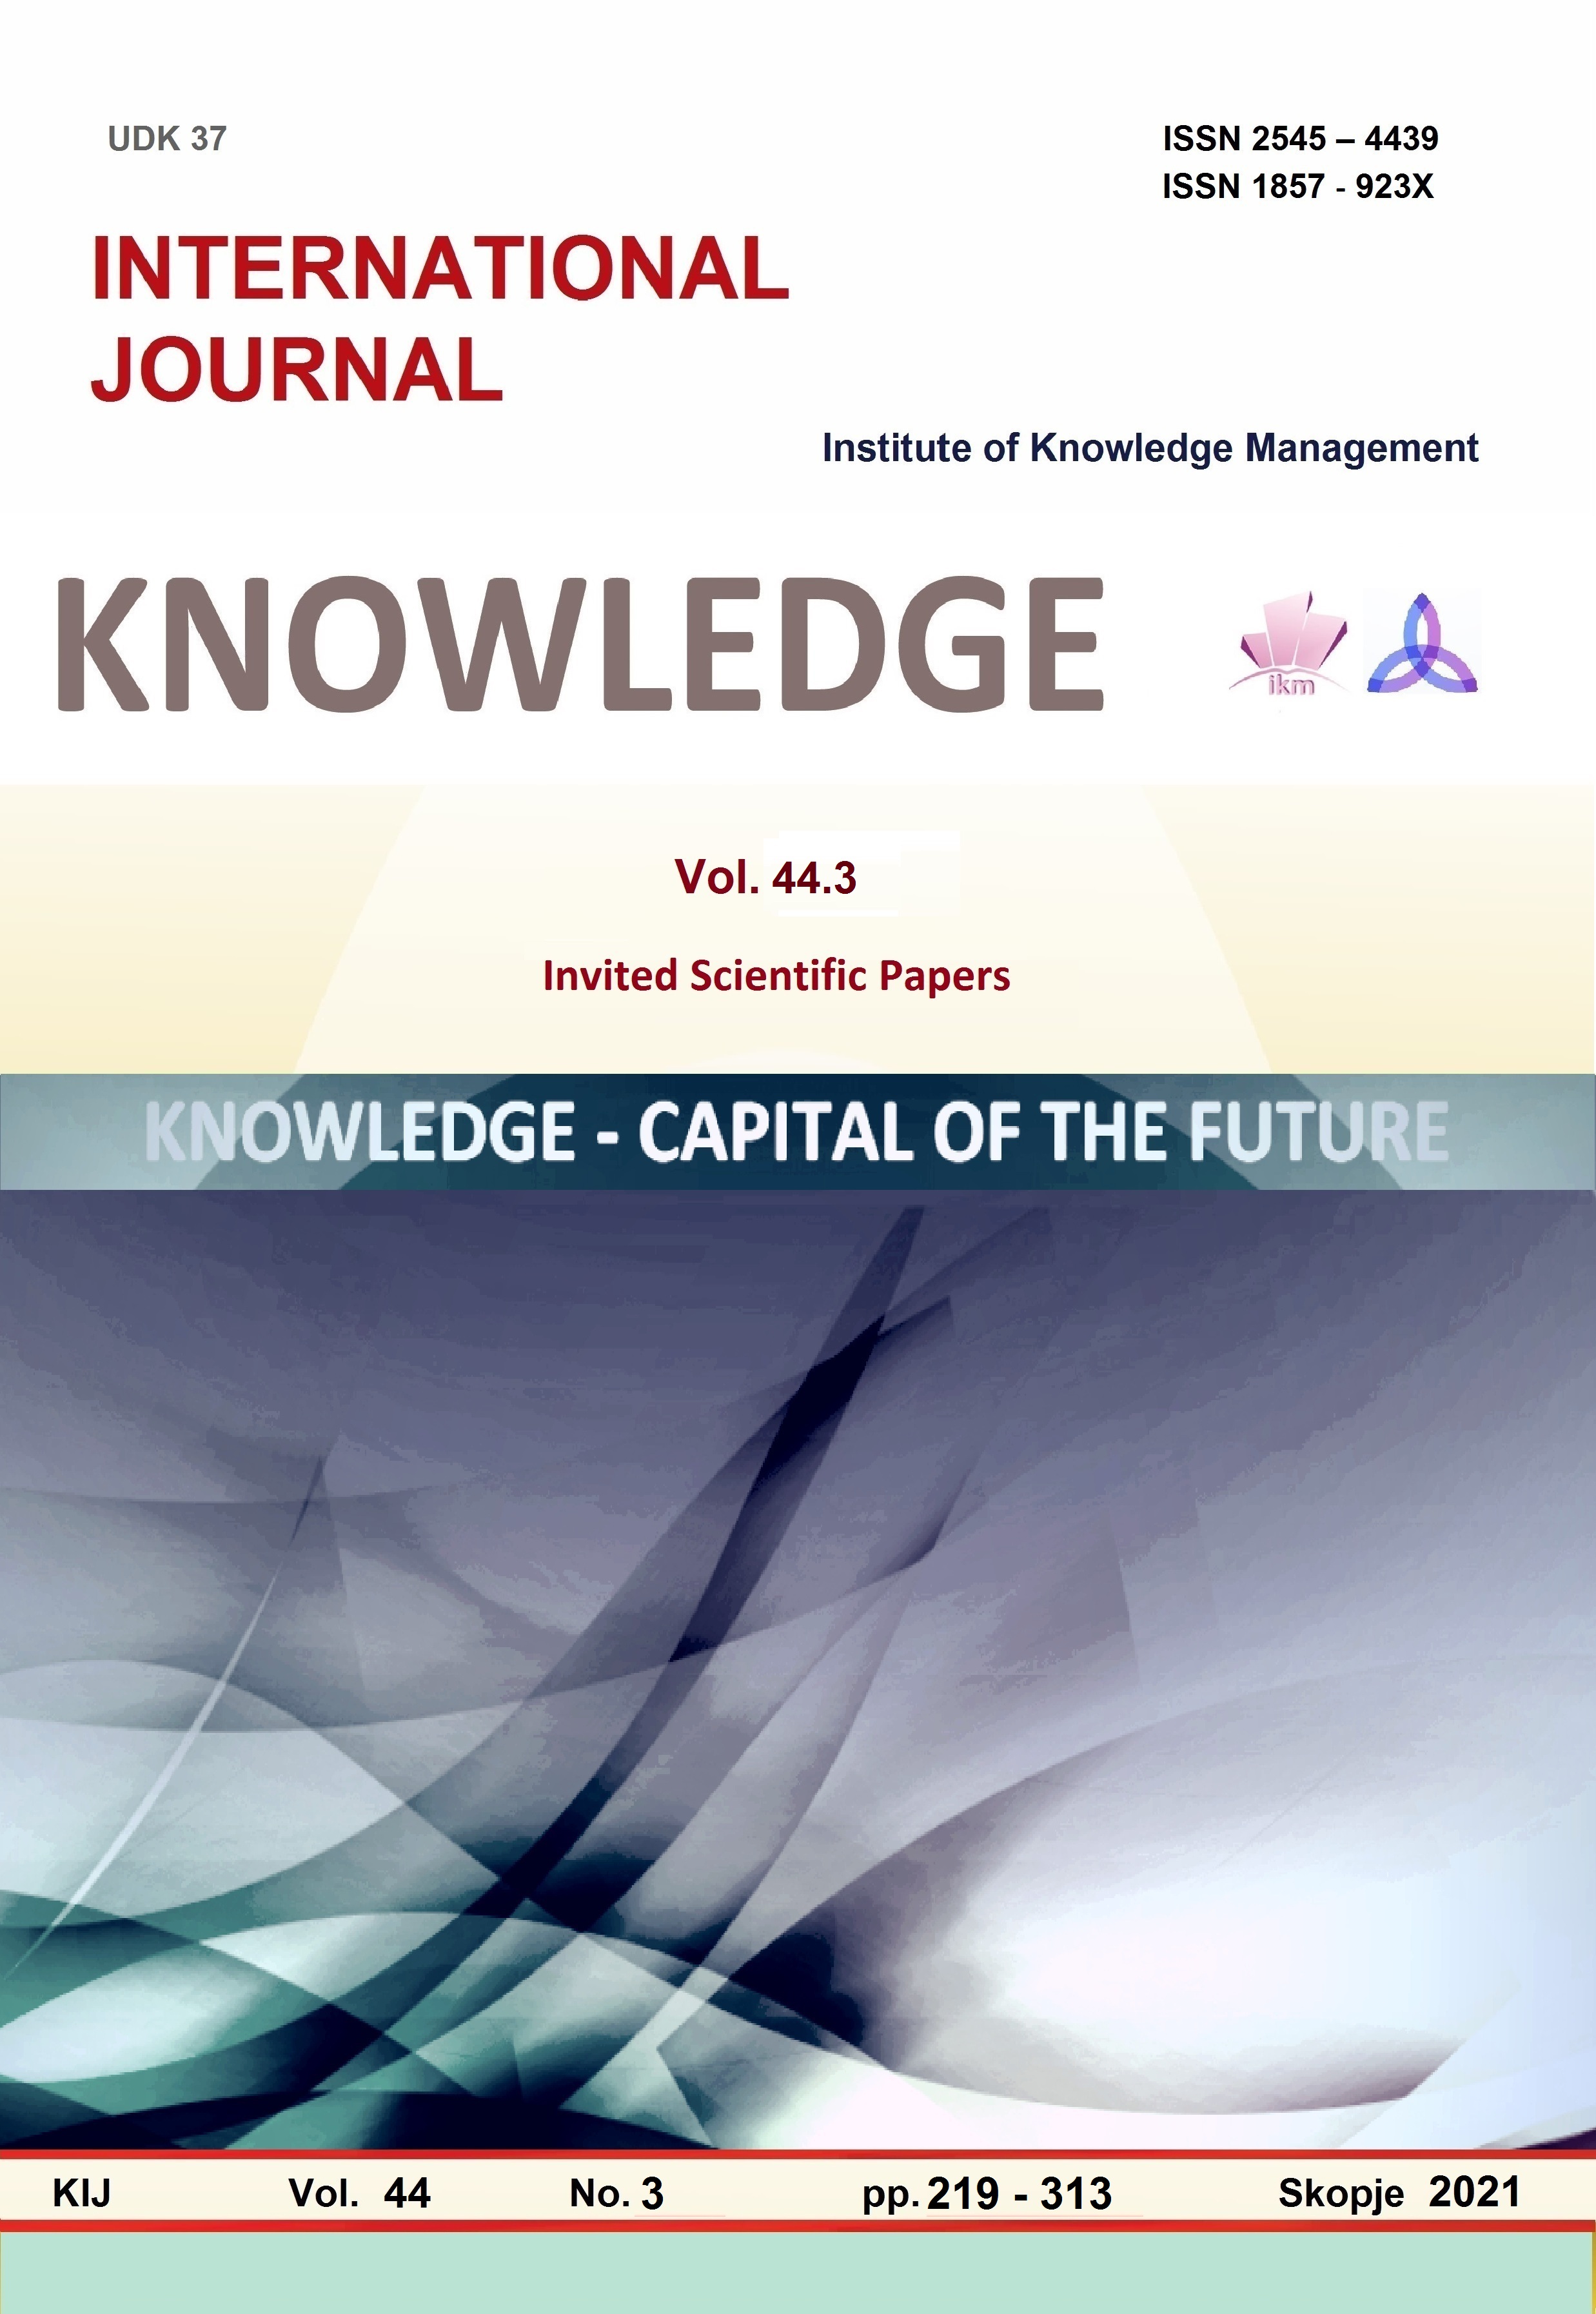 					View Vol. 44 No. 3 (2021): Knowledge - Capital Of The Future
				